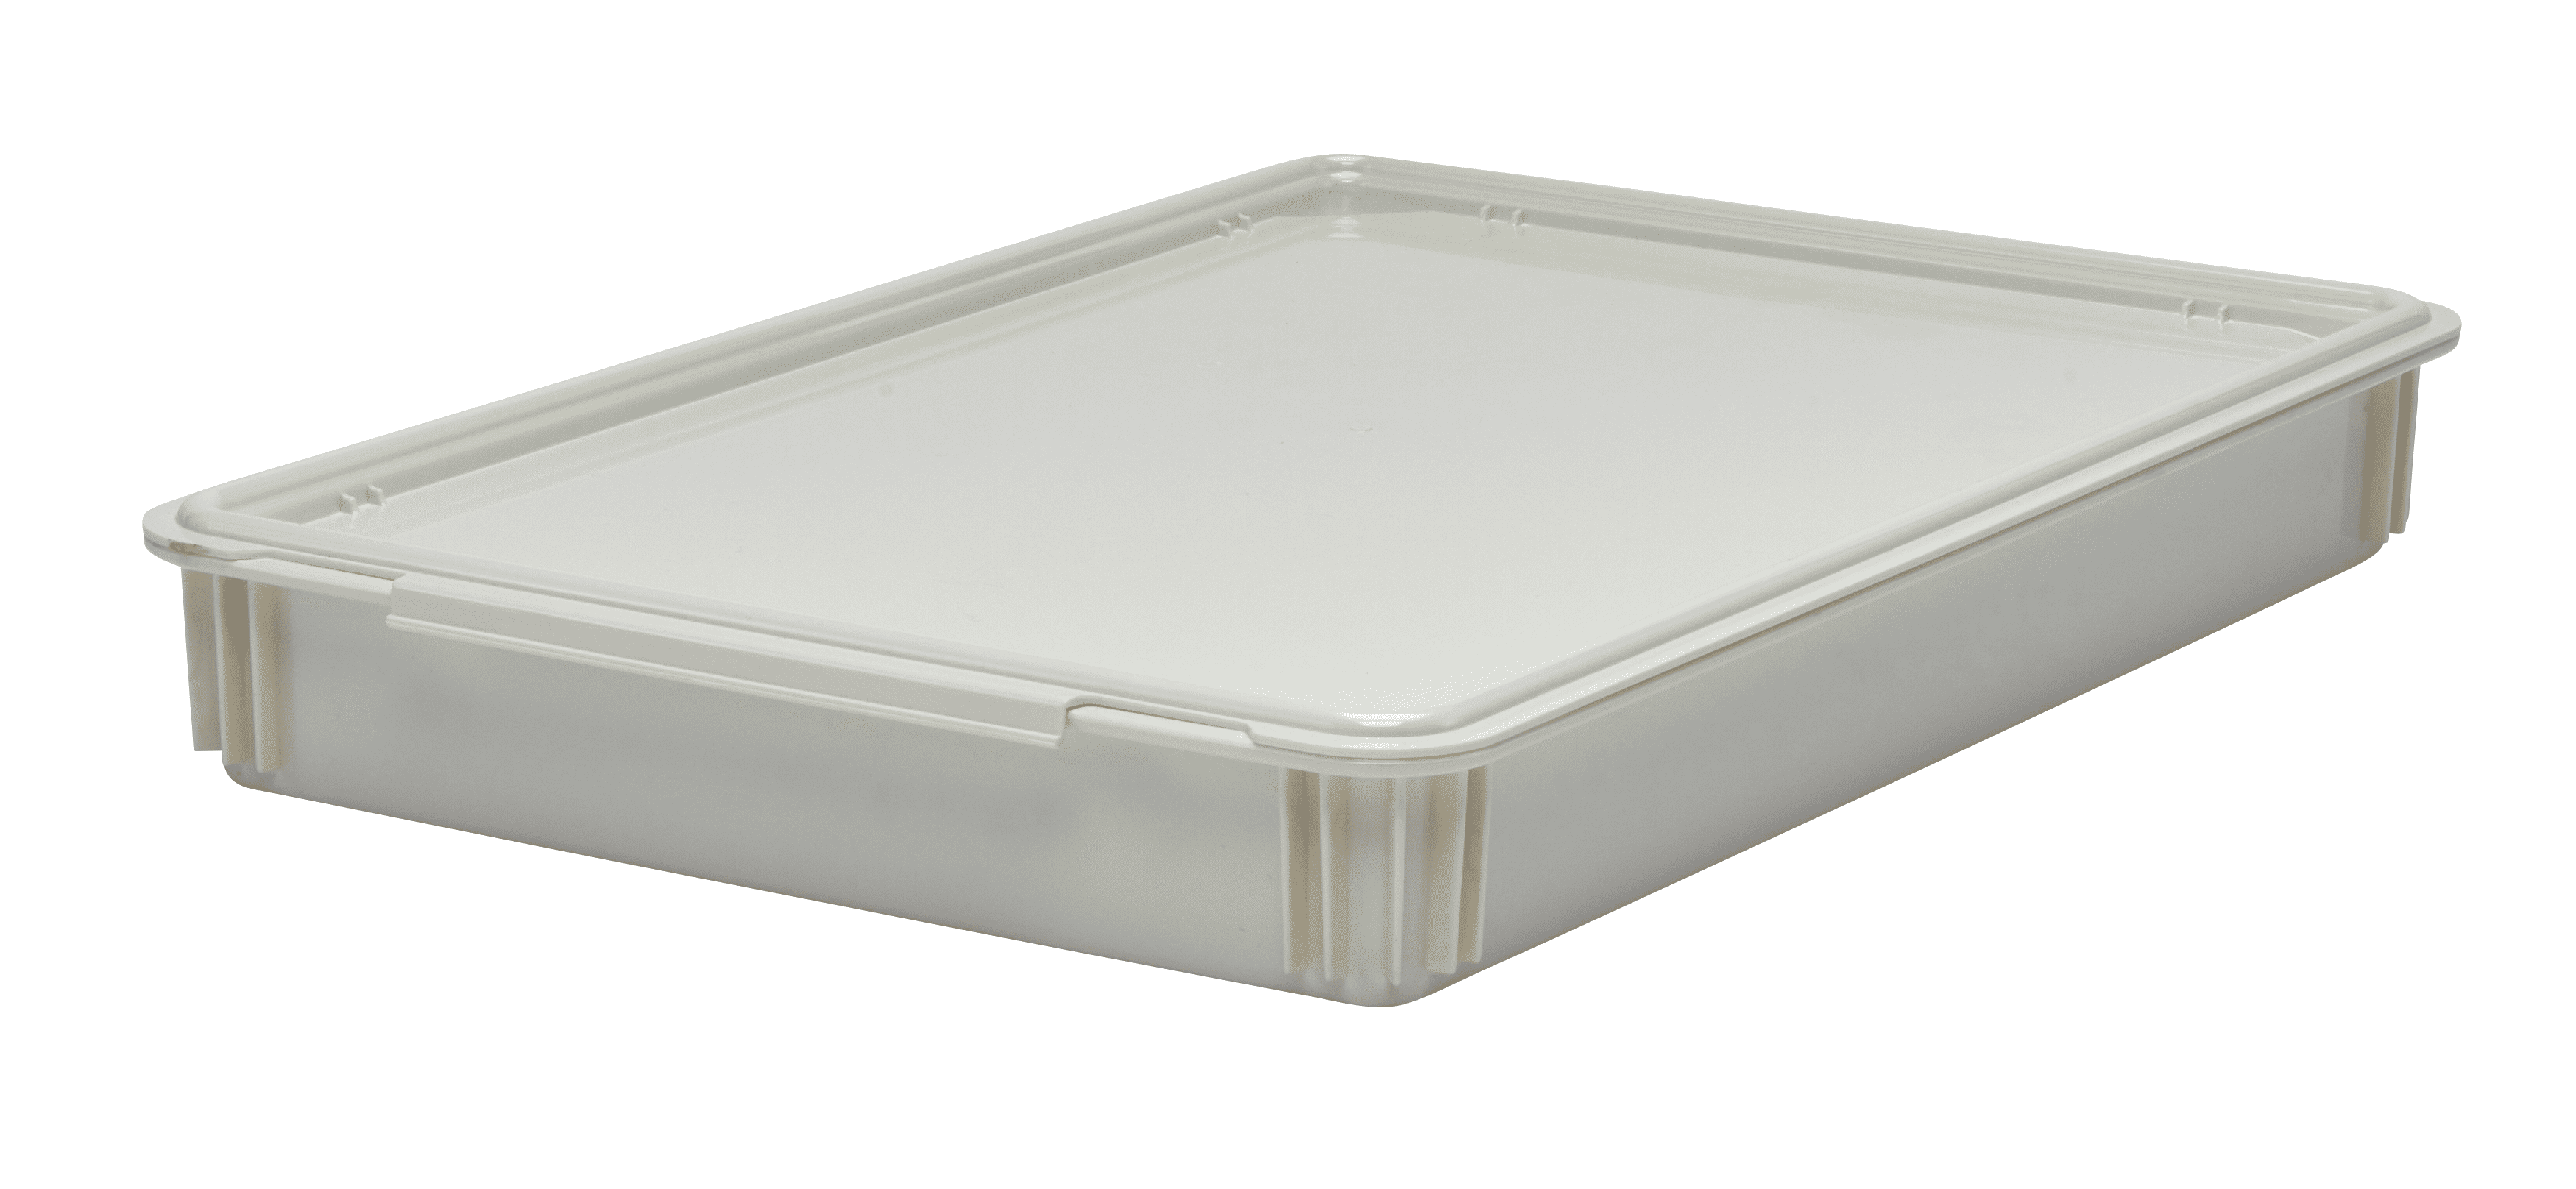 Pizza Dough Boxes Made in the USA